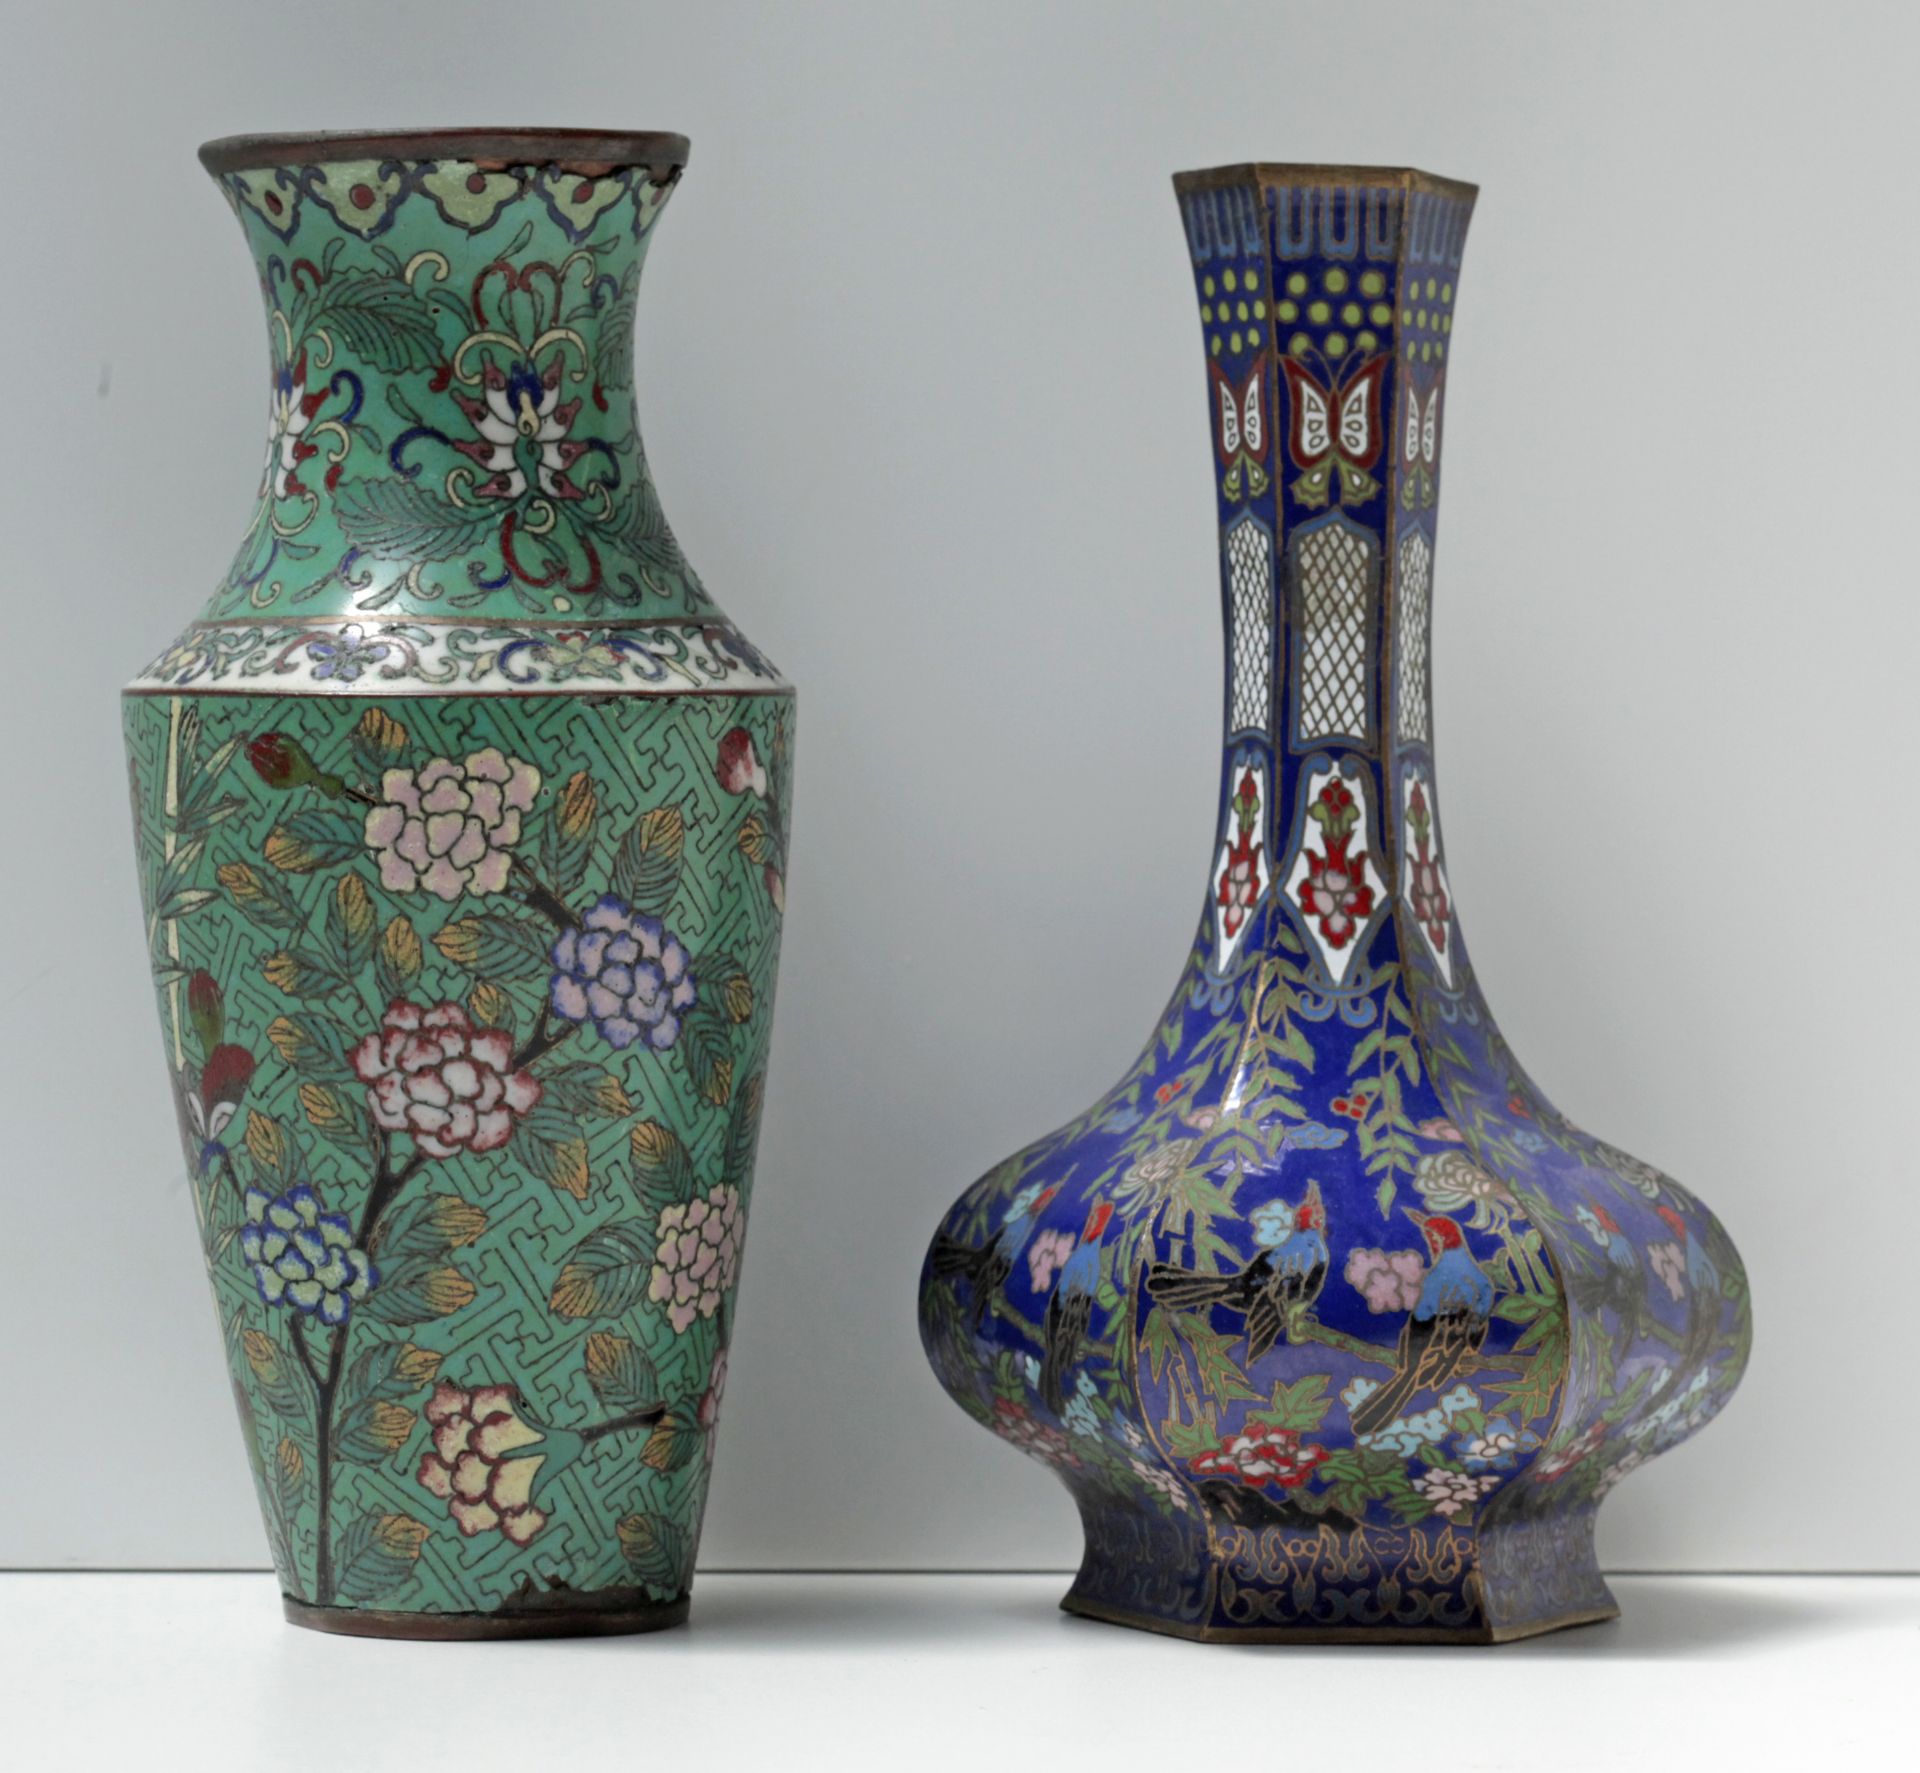 A pair of 19th century Chinese vases in copper and cloisonné enamel